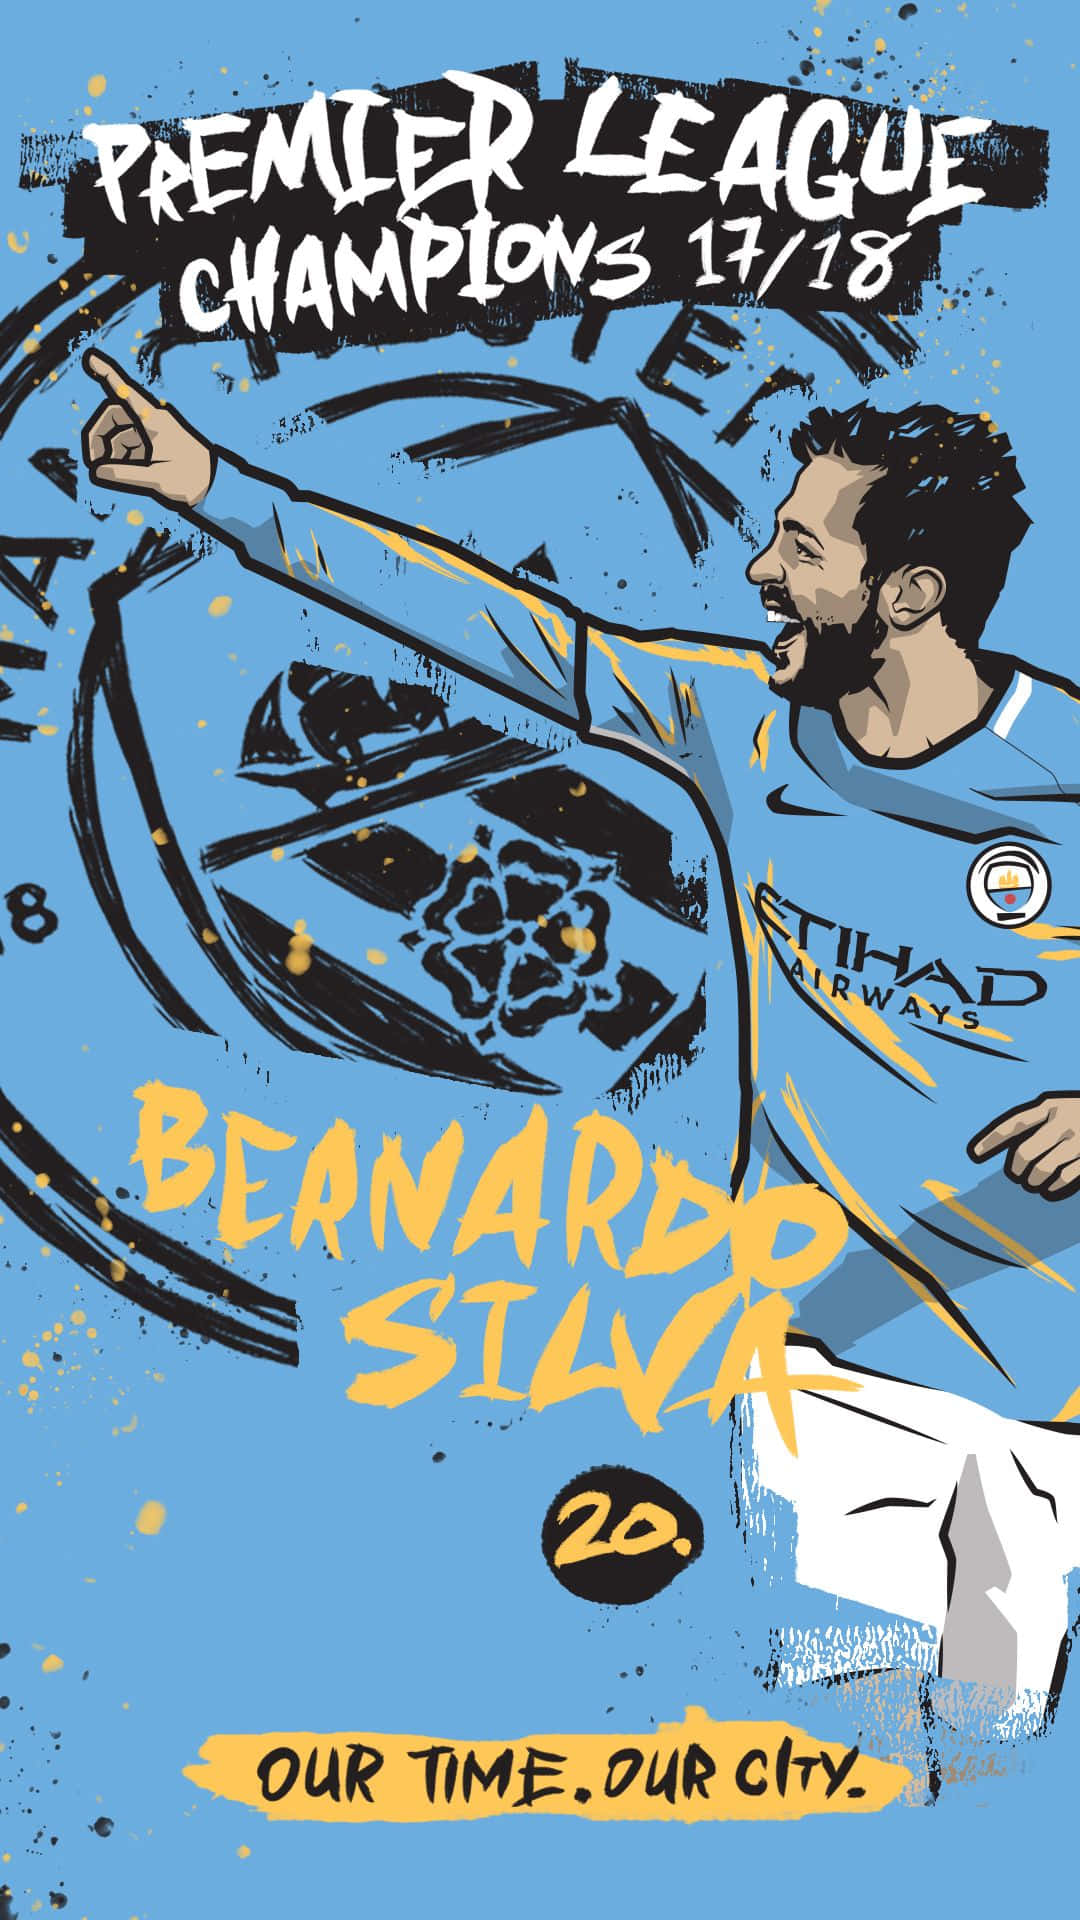 Get ready for the match with the Man City Iphone Wallpaper